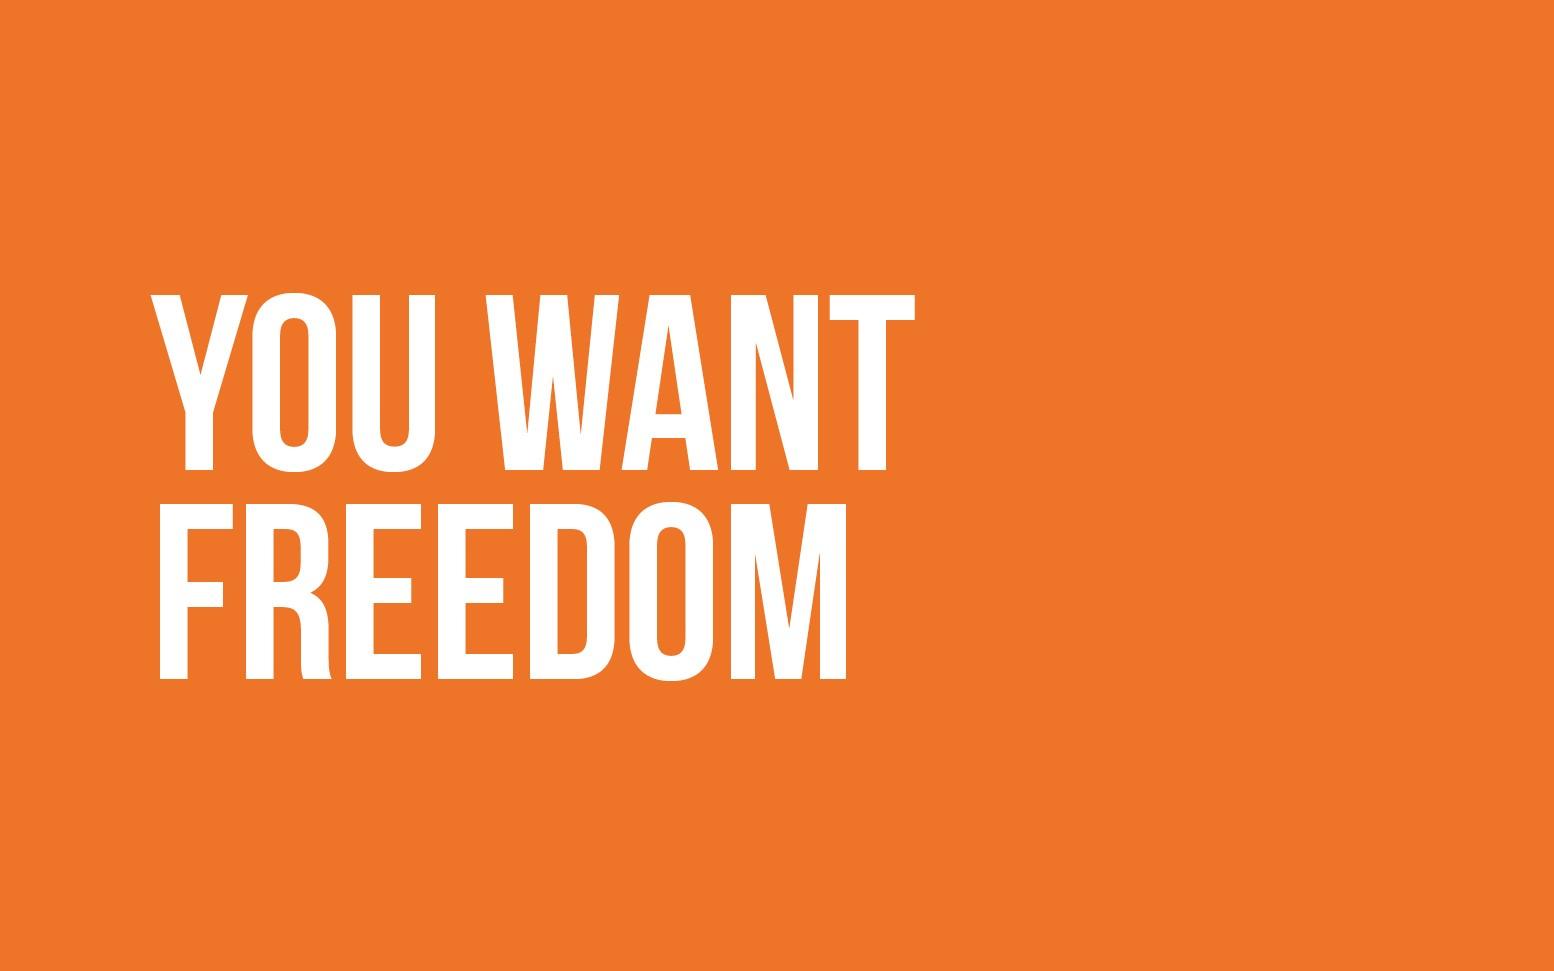  YOU WANT FREEDOM